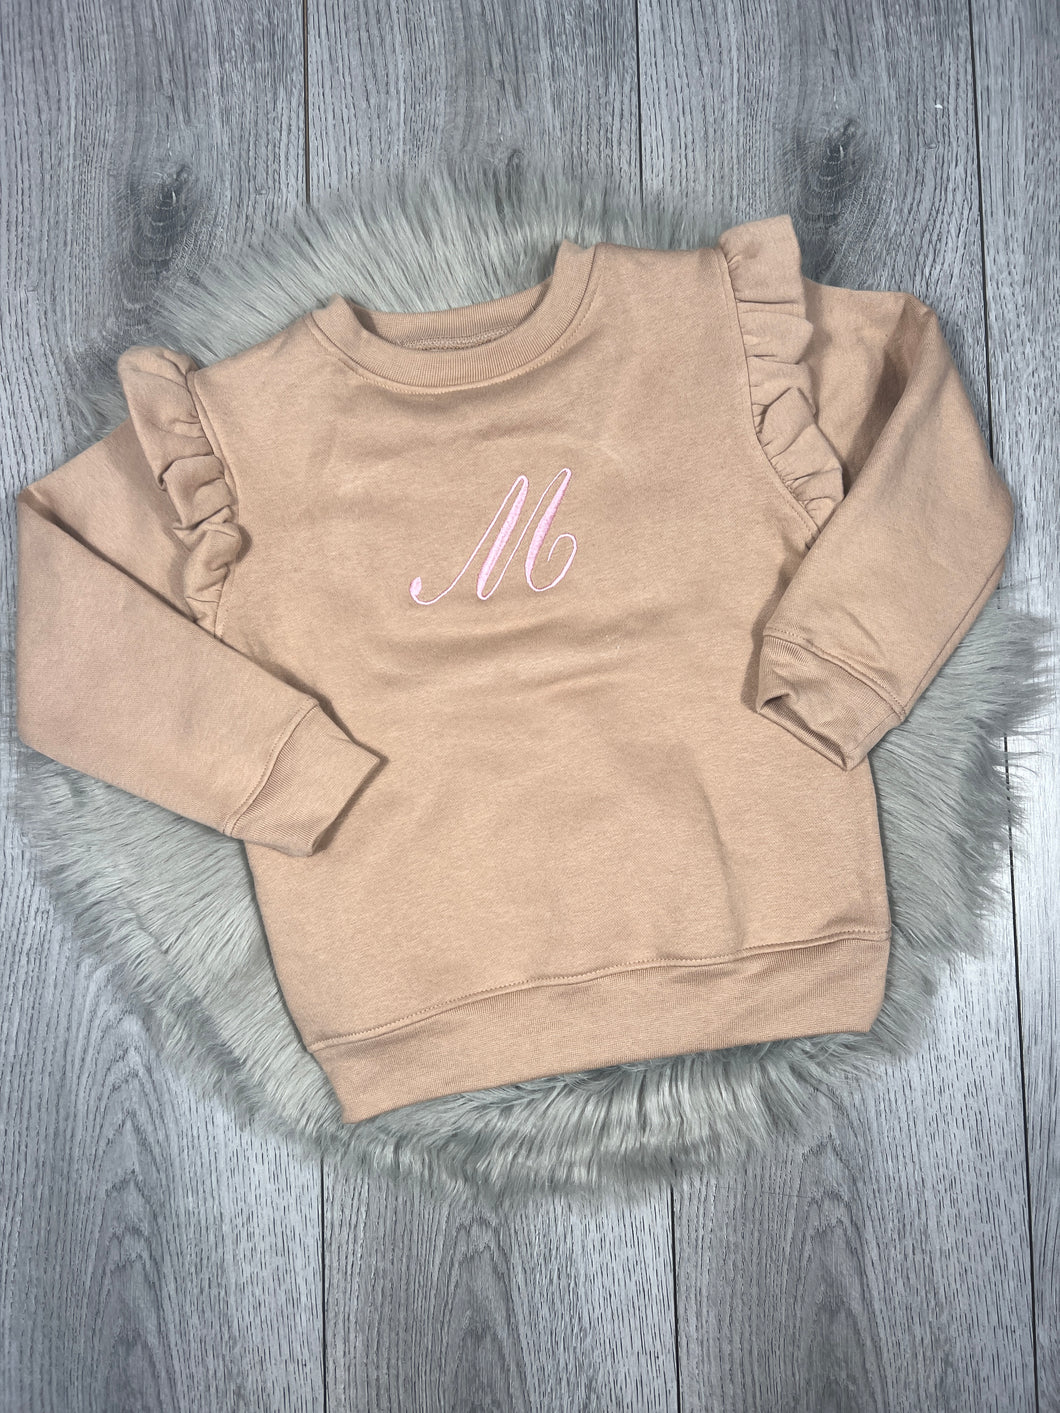 Personalised Children's Embroidered Frill Sweatshirt. Nude